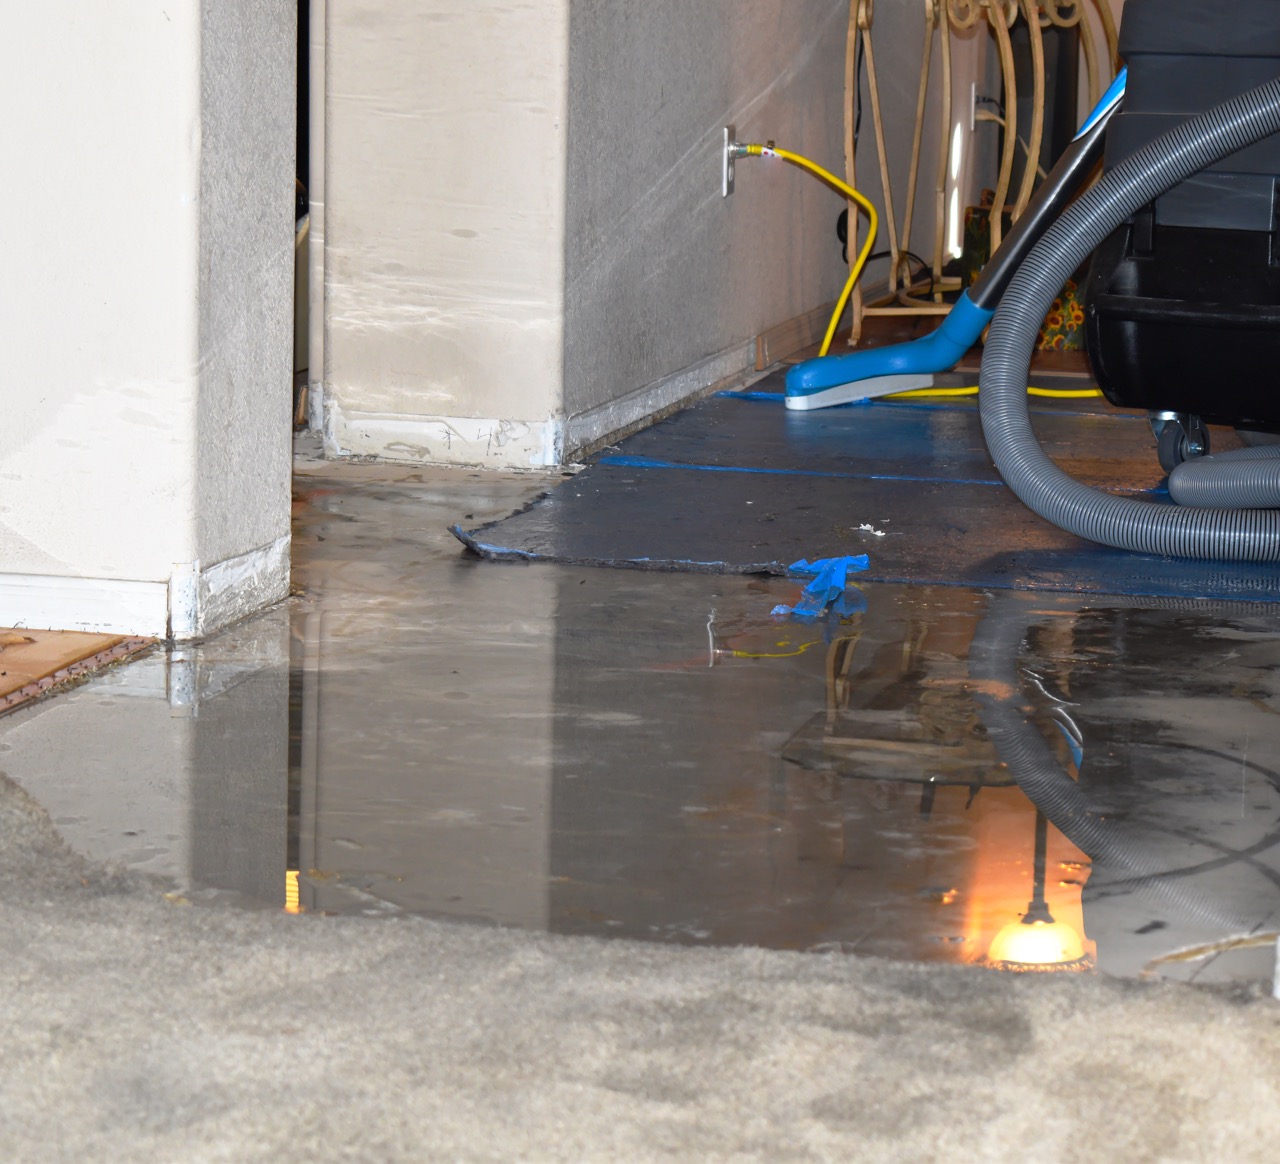 A room in the home is flooded with water from a broken water heater